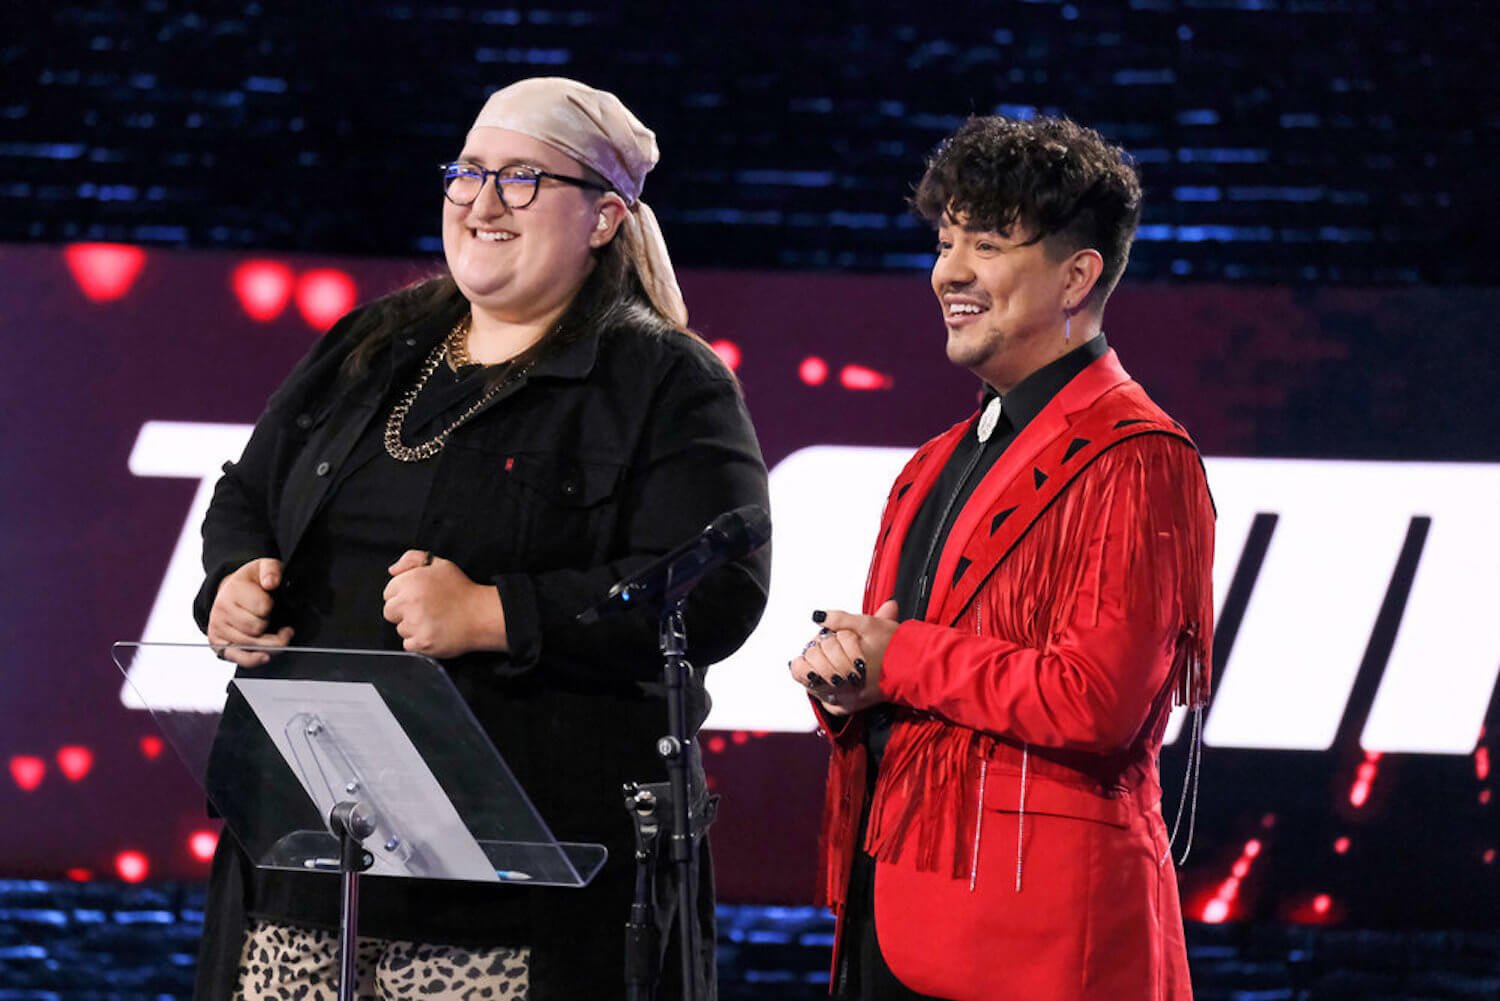 ALI and Marcos Covos in 'The Voice' Season 23. 'The Voice' Season 23 spoilers note they compete against each other in the Knockout Round